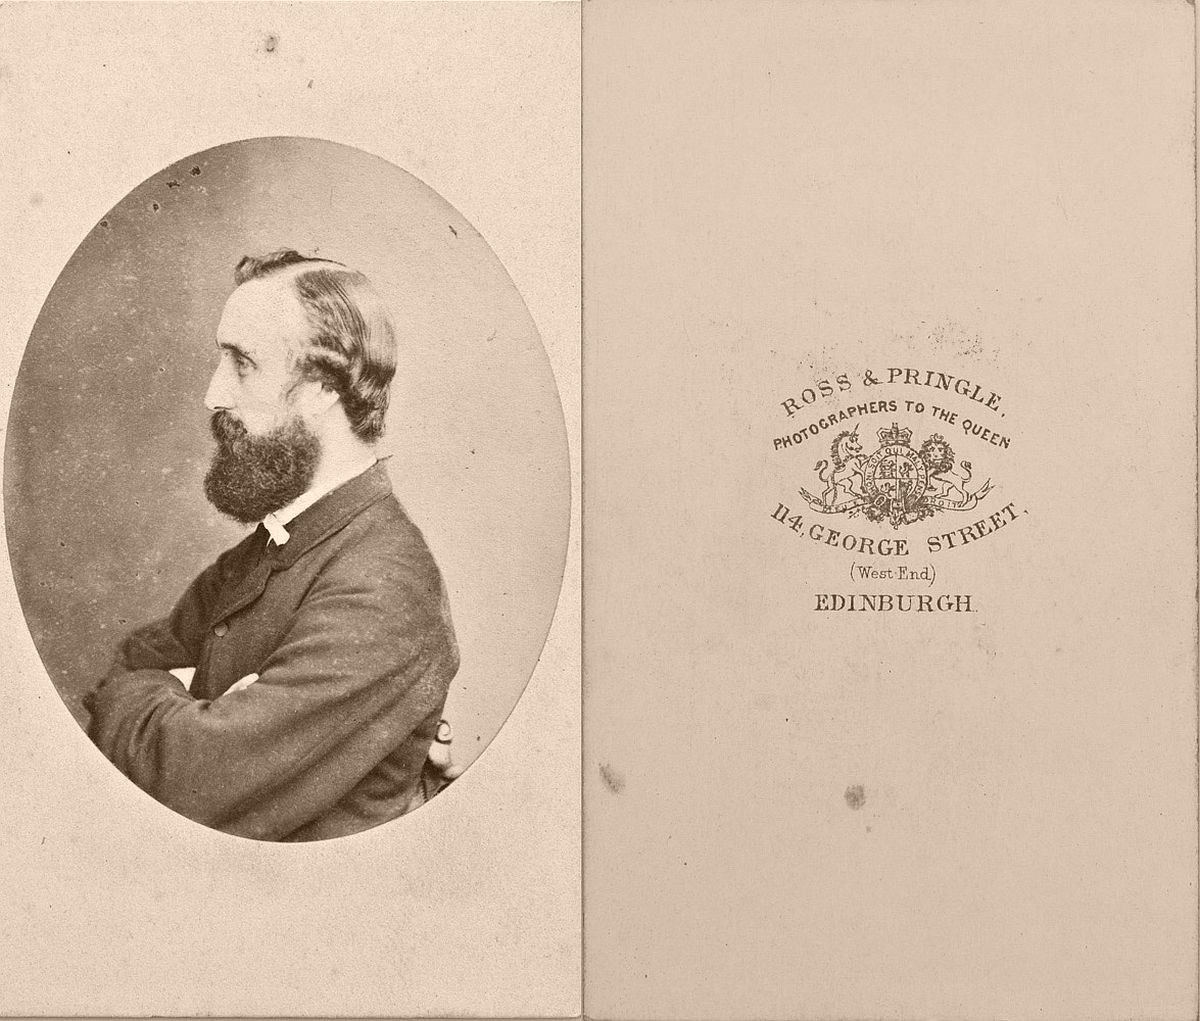 historic-19th-century-cabinet-card-portraits-with-reverse-side-1870s-to-1880s-09